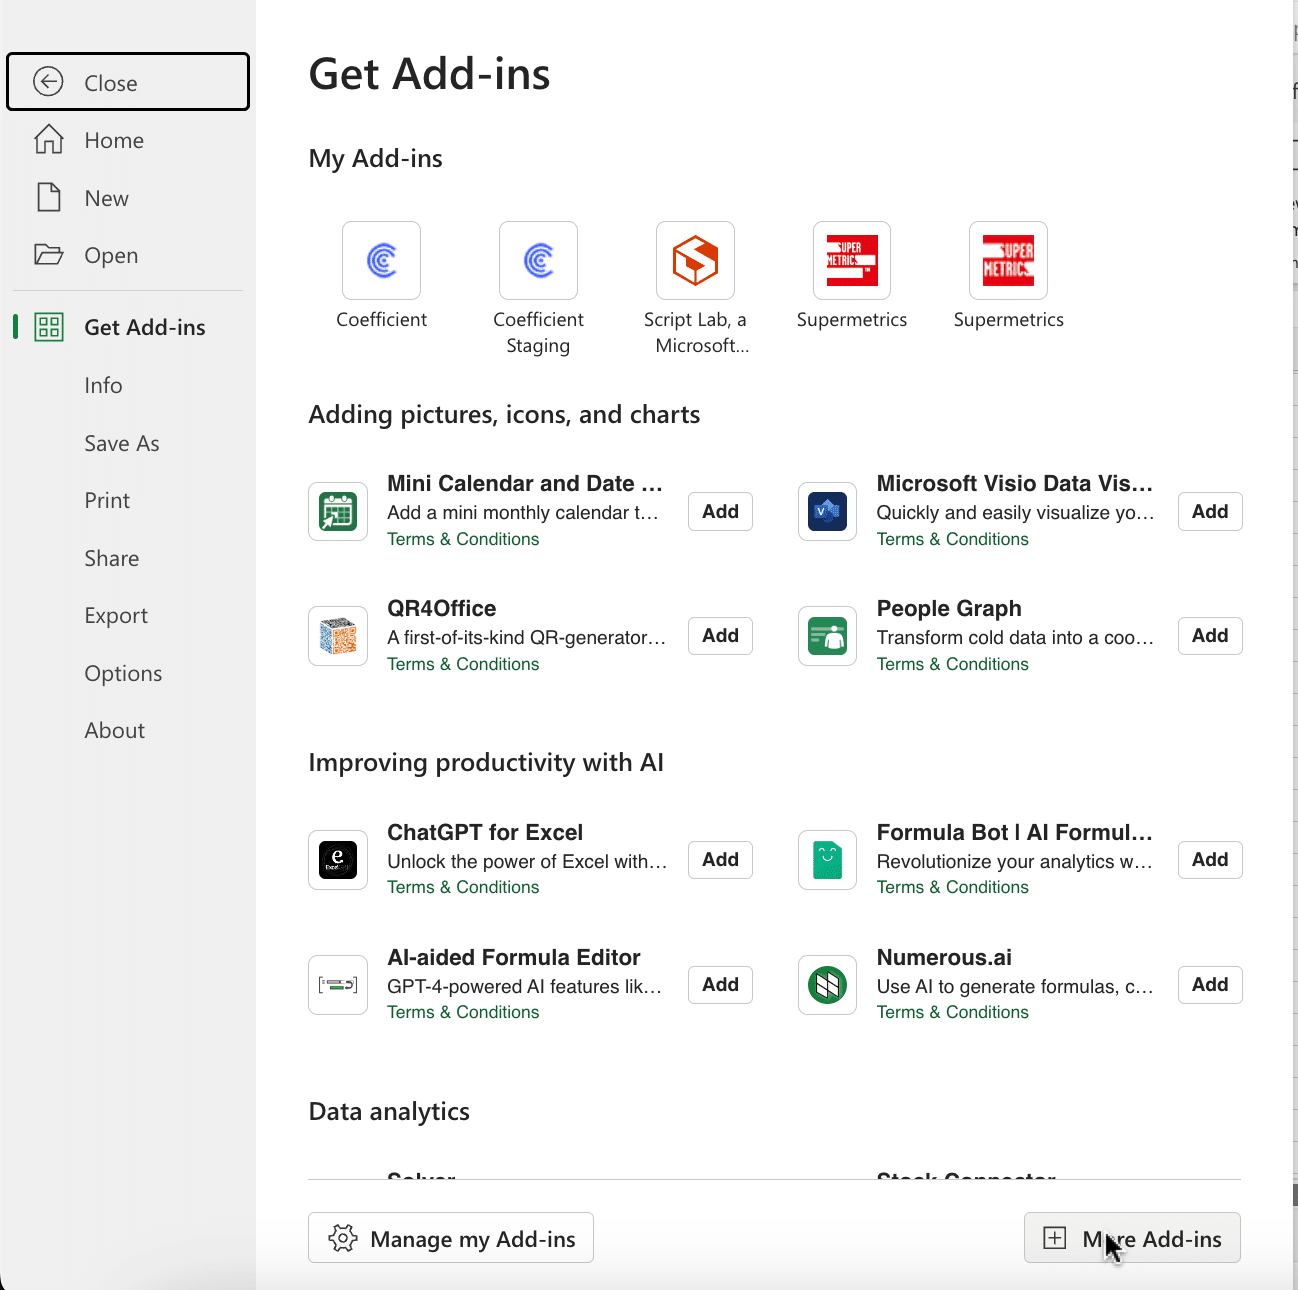 Navigating to More Add-Ins through Excel's File menu for adding new features